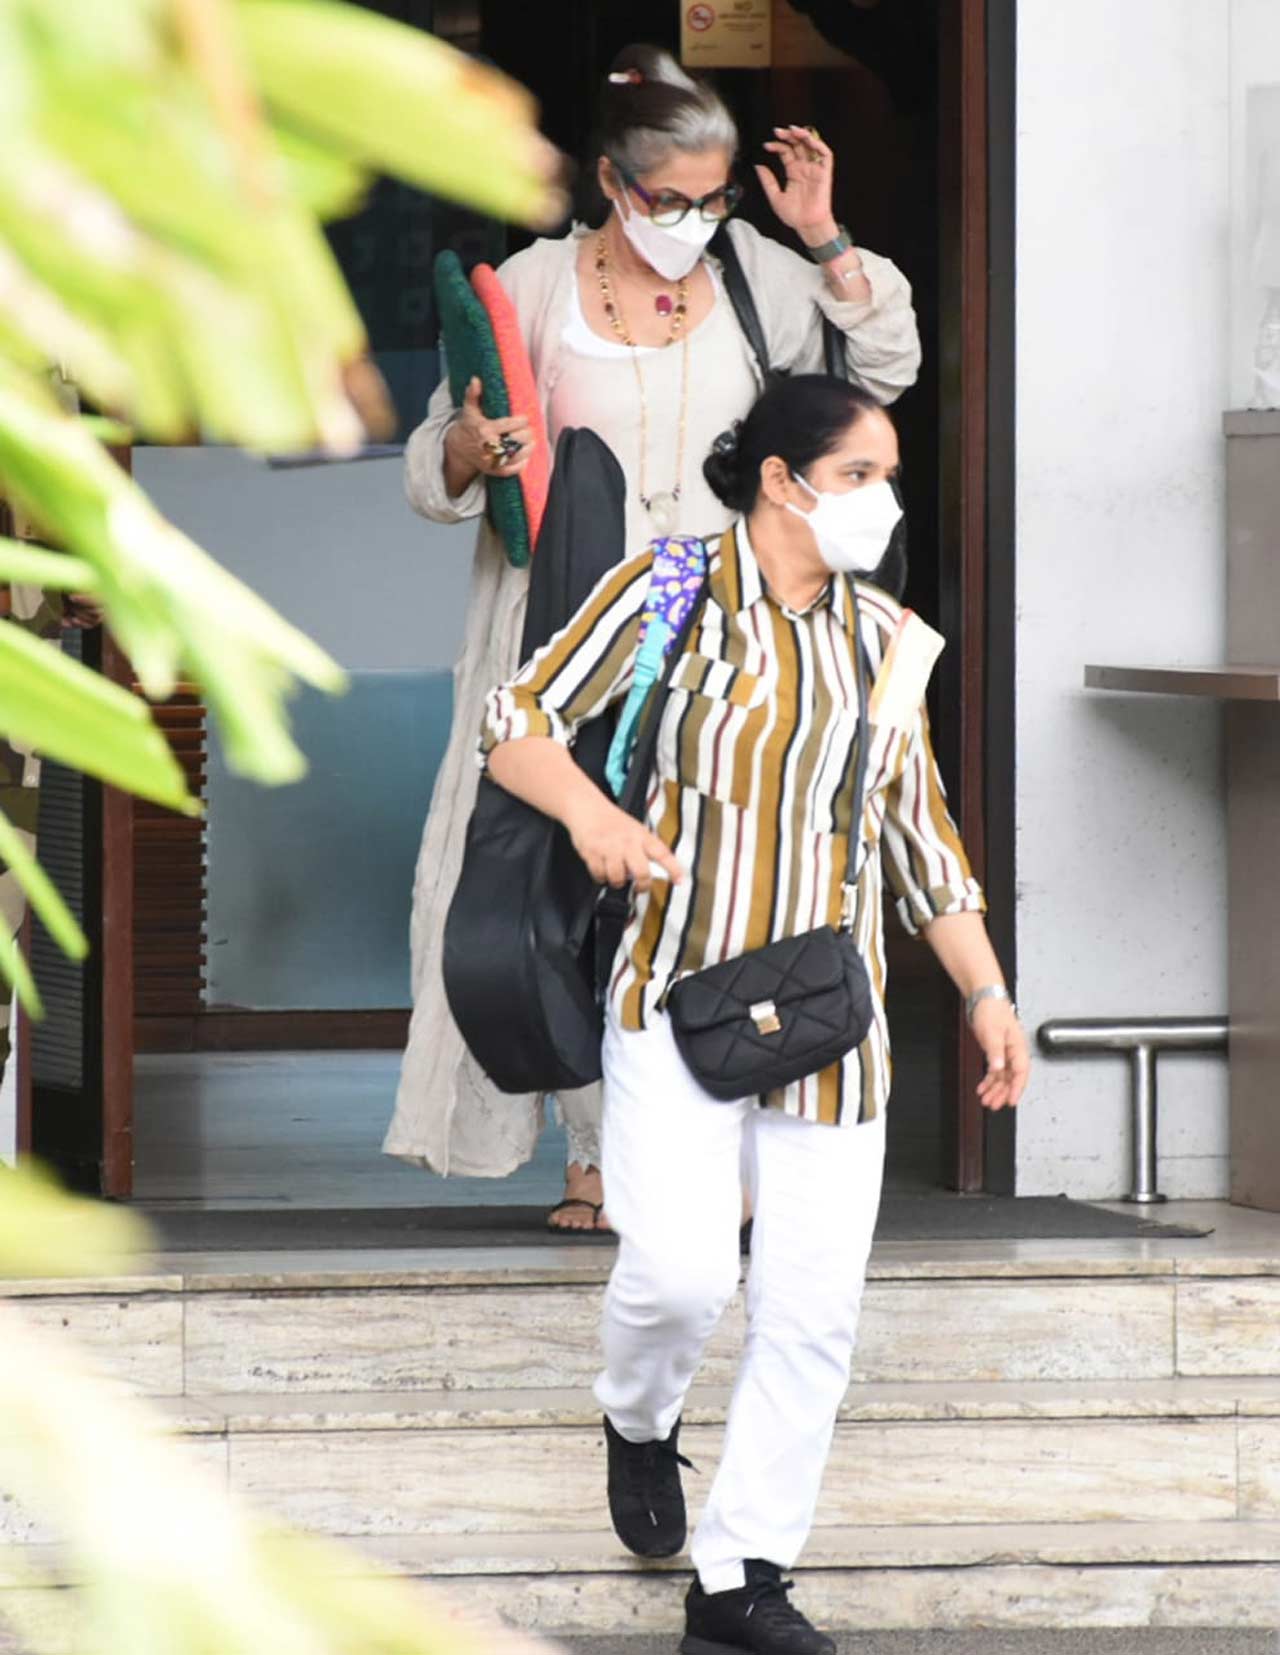 Dimple Kapadia also joined the mother-daughter duo for their outing. The trio was snapped at the airport together. On the work front, Dimple was last seen in Christopher Nolan's Tenet, and later, in the web show Tandav.